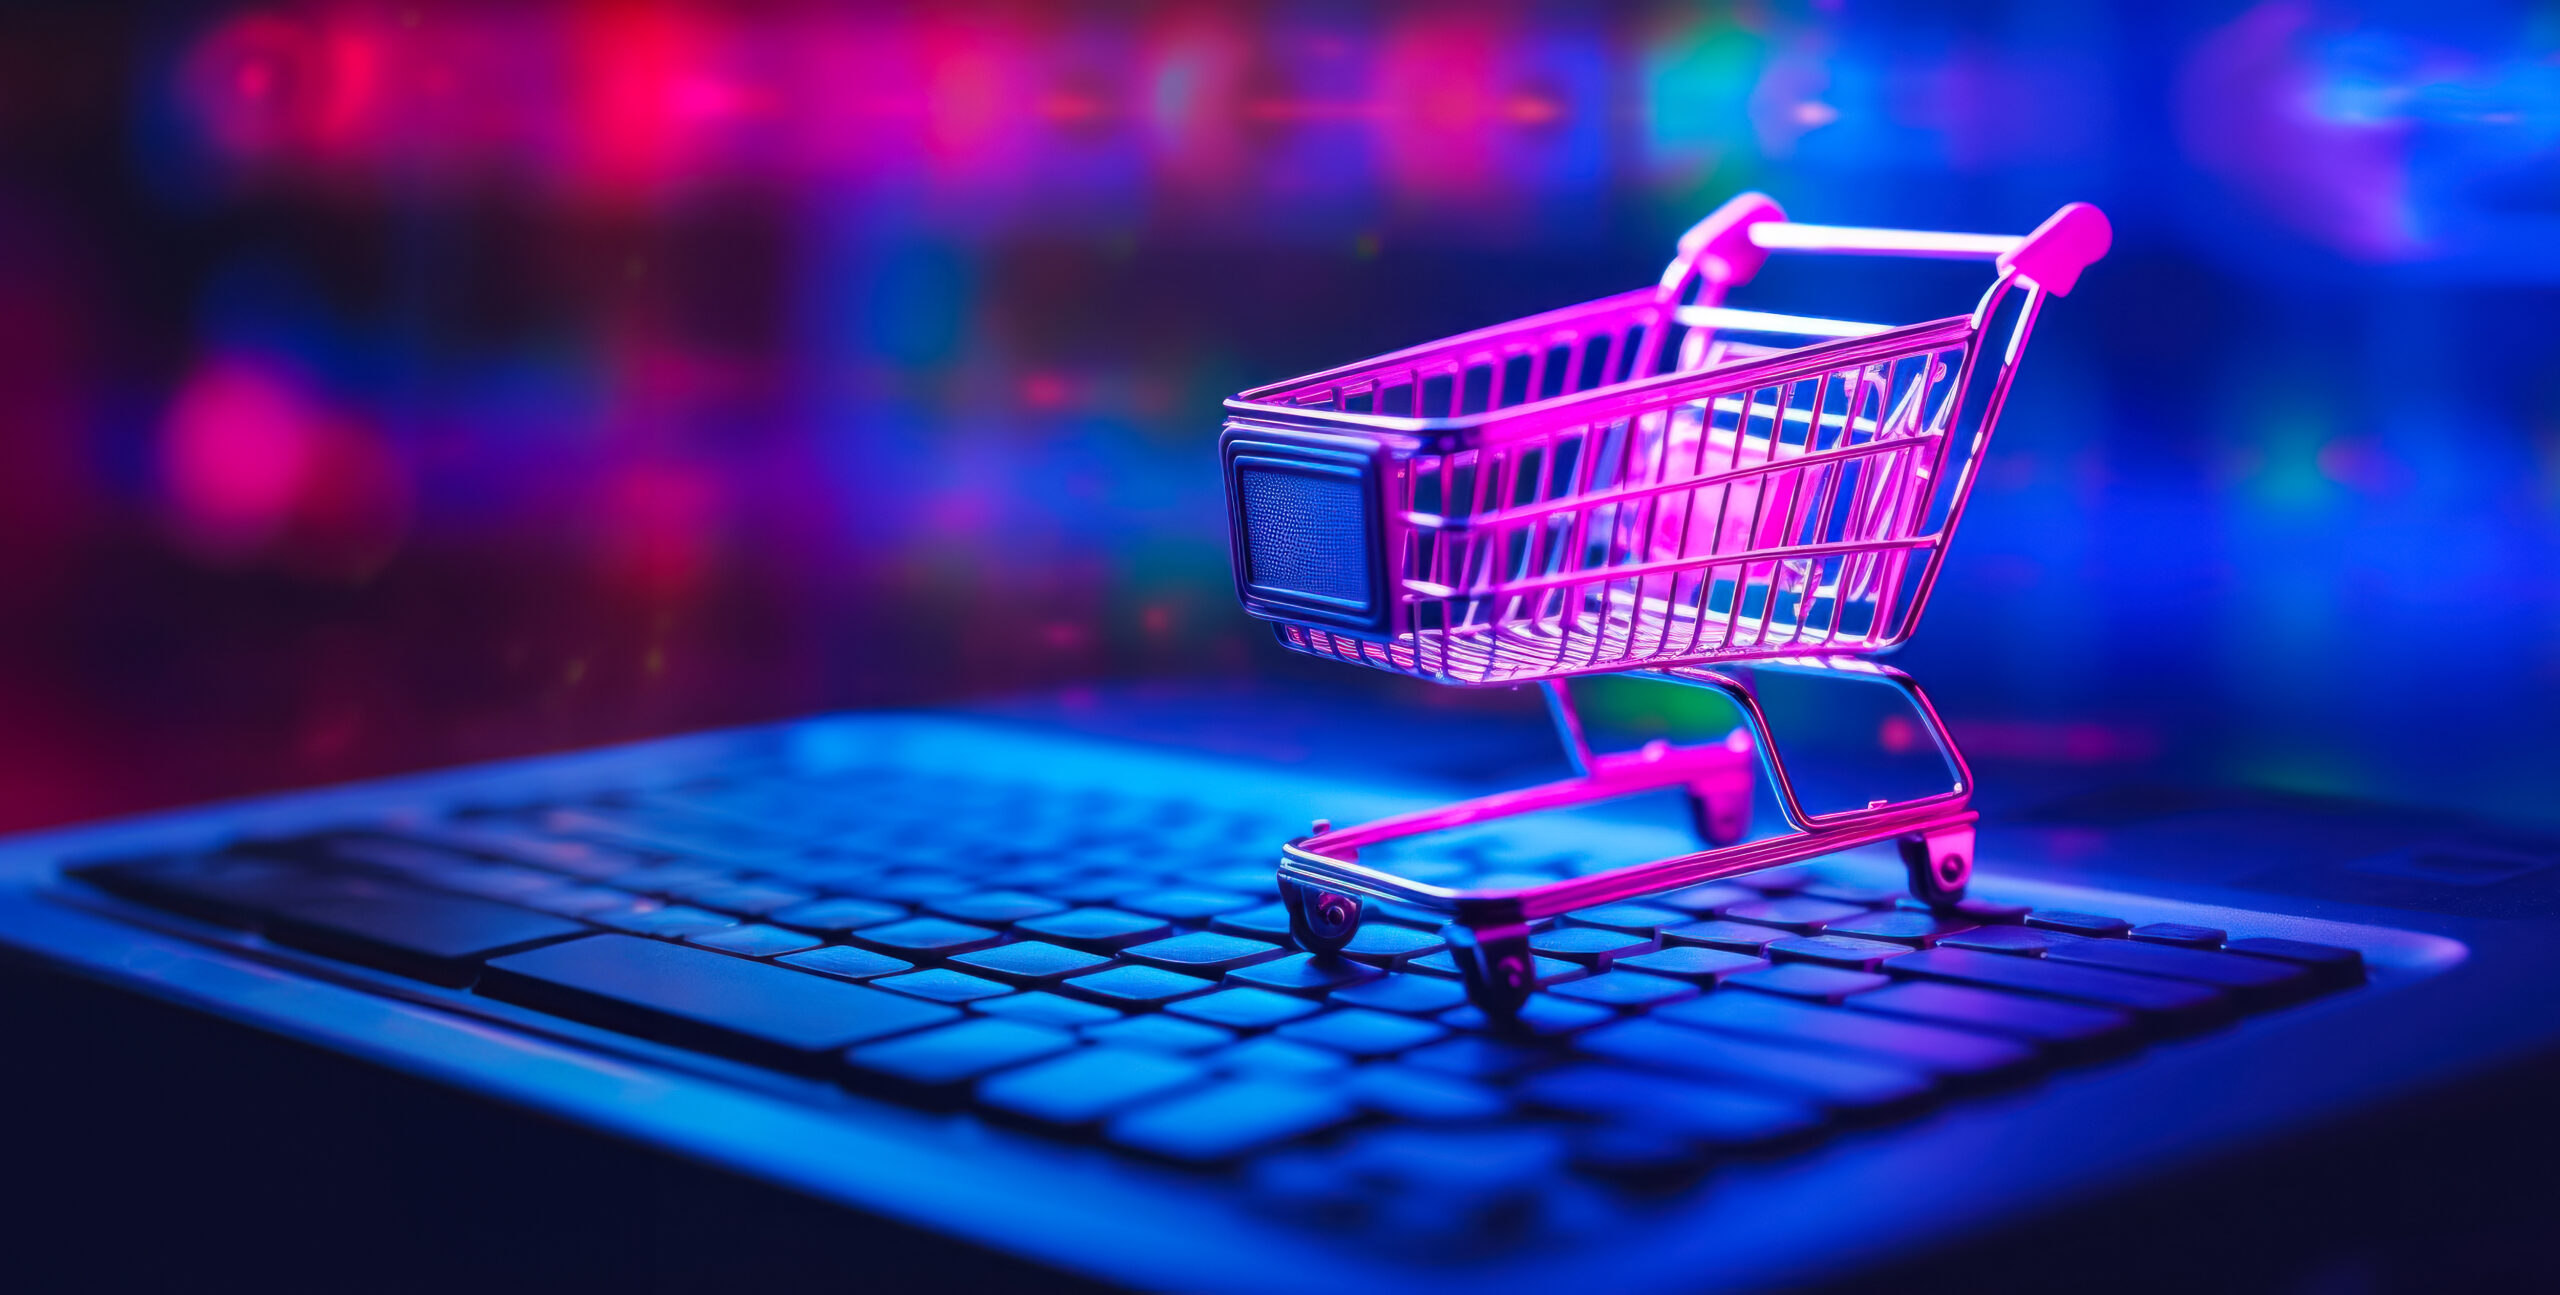 Photo of a shopping cart standing on a computer keyboard.